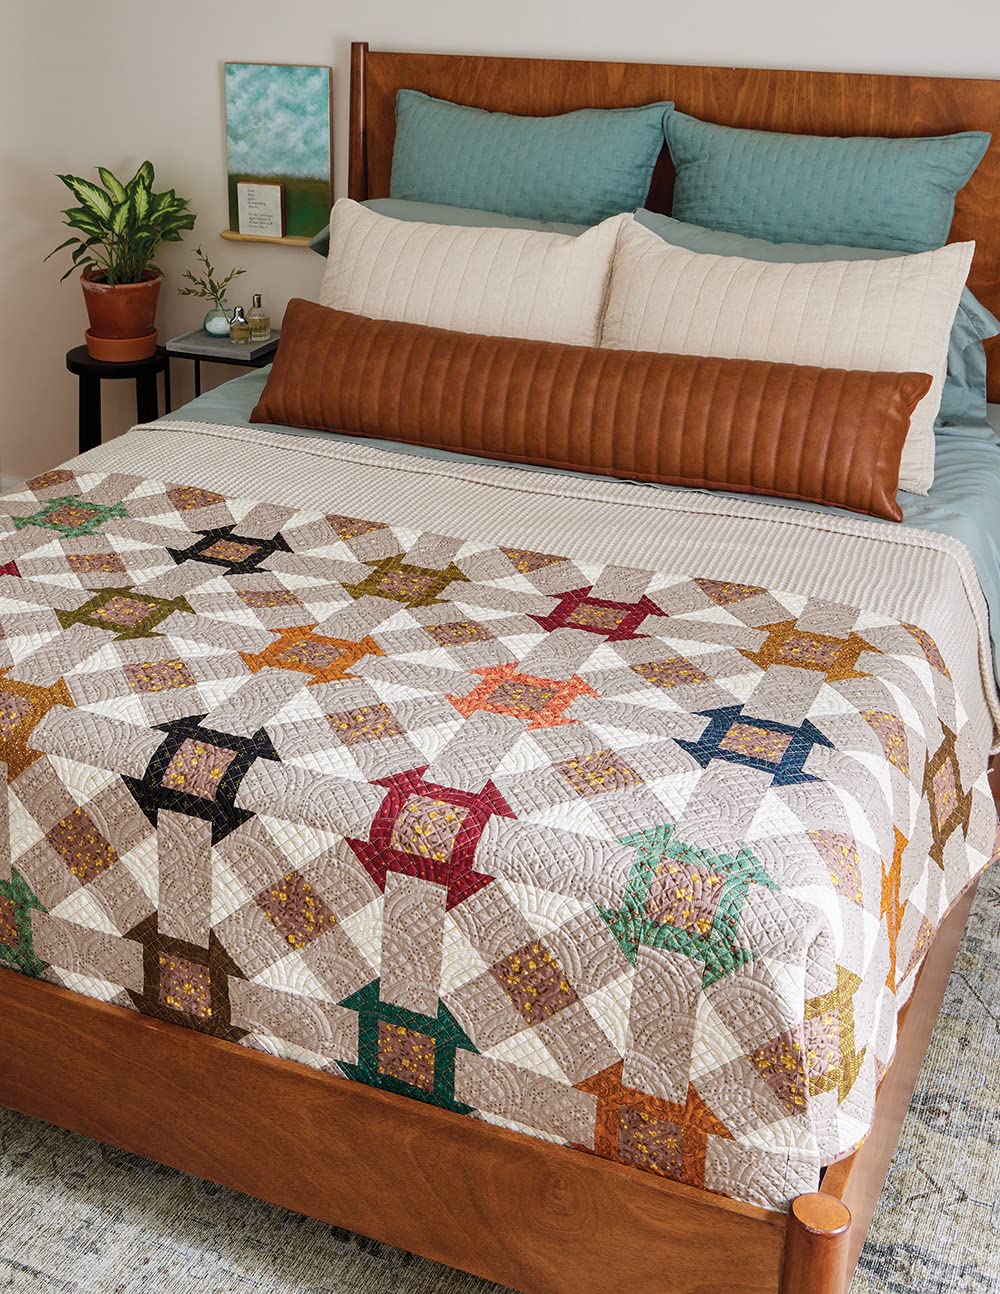 Simple Double-Dipped Quilts Book